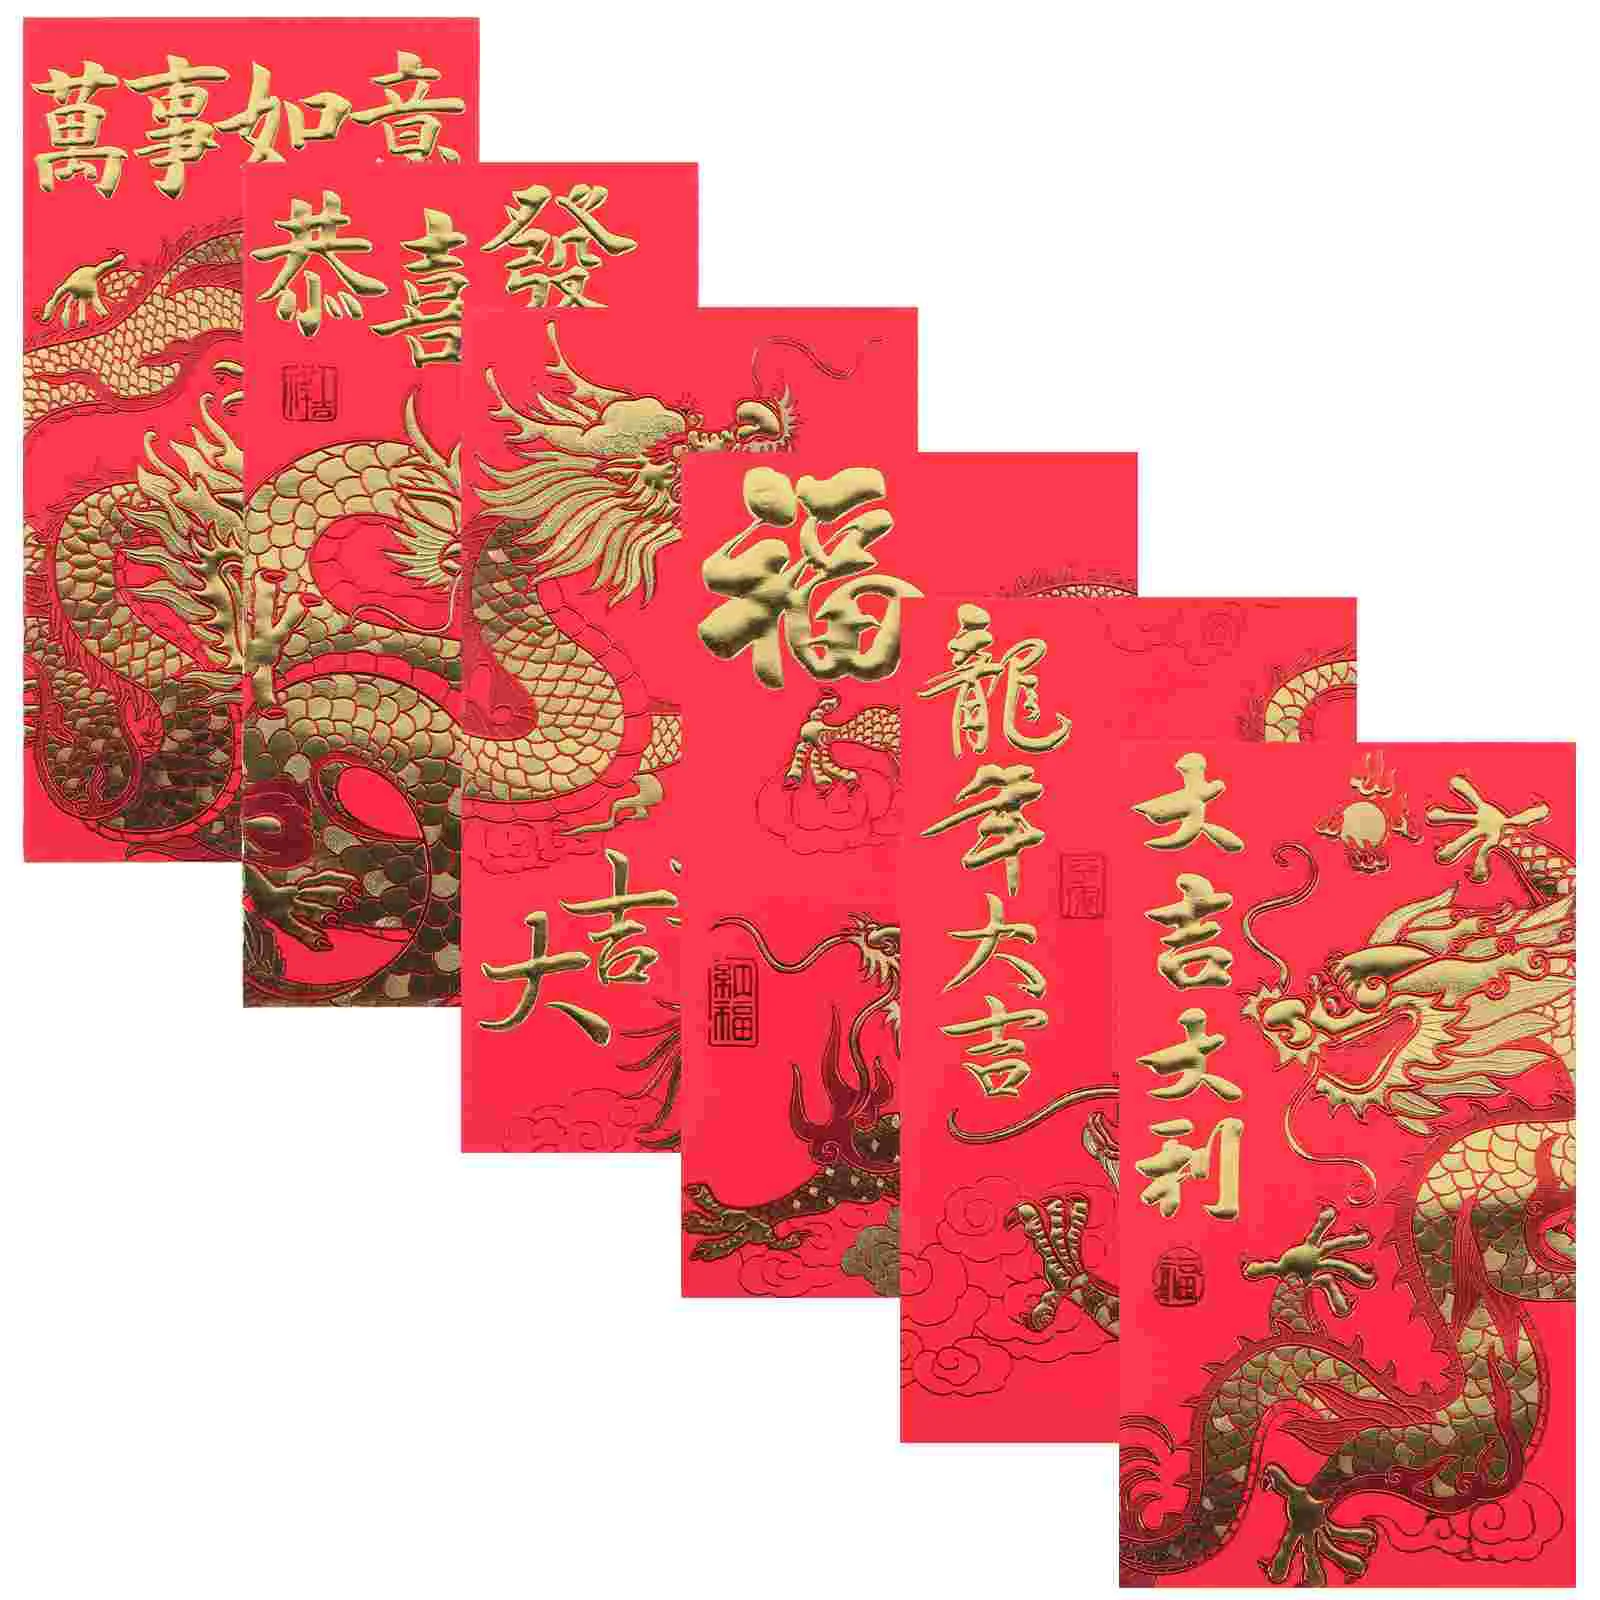 

6 Pcs Festival Red Envelopes Luck Money Bag Chinese Pocket New Year Packets Paper Lunar Gift Bags